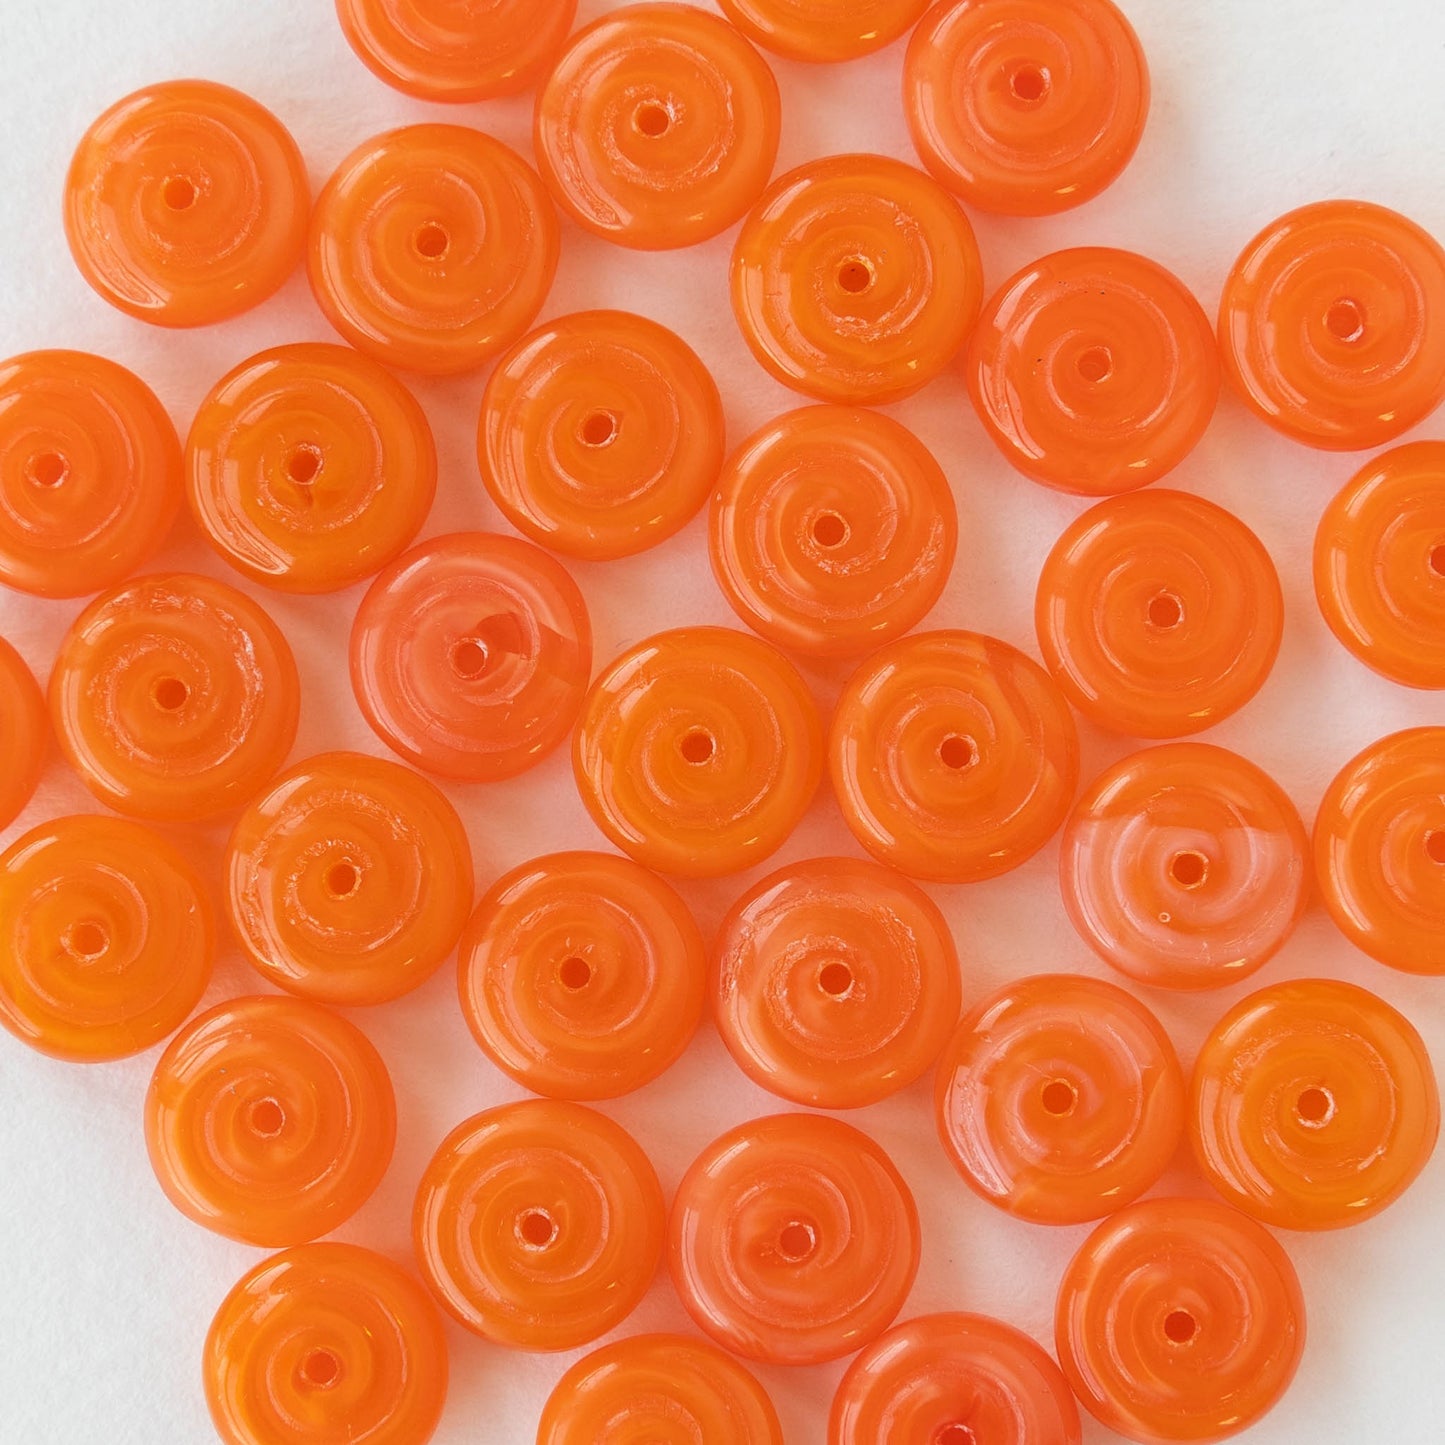 Load image into Gallery viewer, 10mm Vintage Glass Rondelle Beads - Orange - 20 Beads
